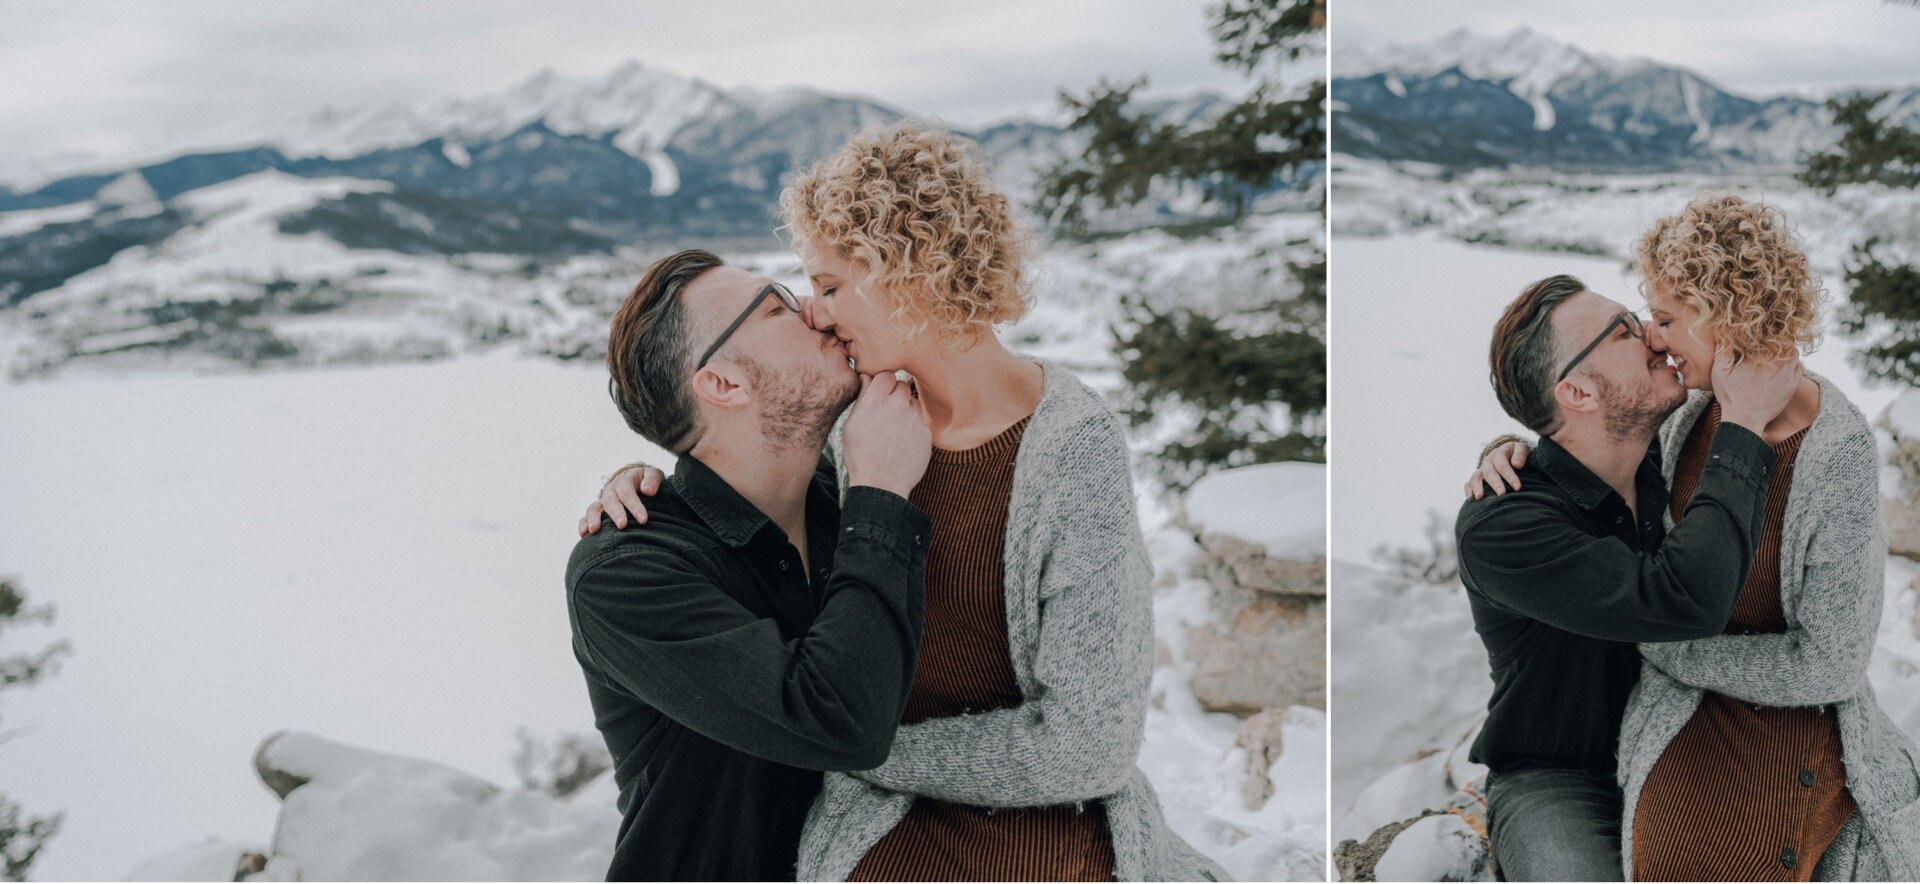 25_Kelsey&Taylor148_Kelsey&Taylor150_frisco_Photographer_engagement_Co_Hannah_Session_Photography_Minnesota_Snowy_Colorado_adventure_ampe_Mountain_engaged.jpg